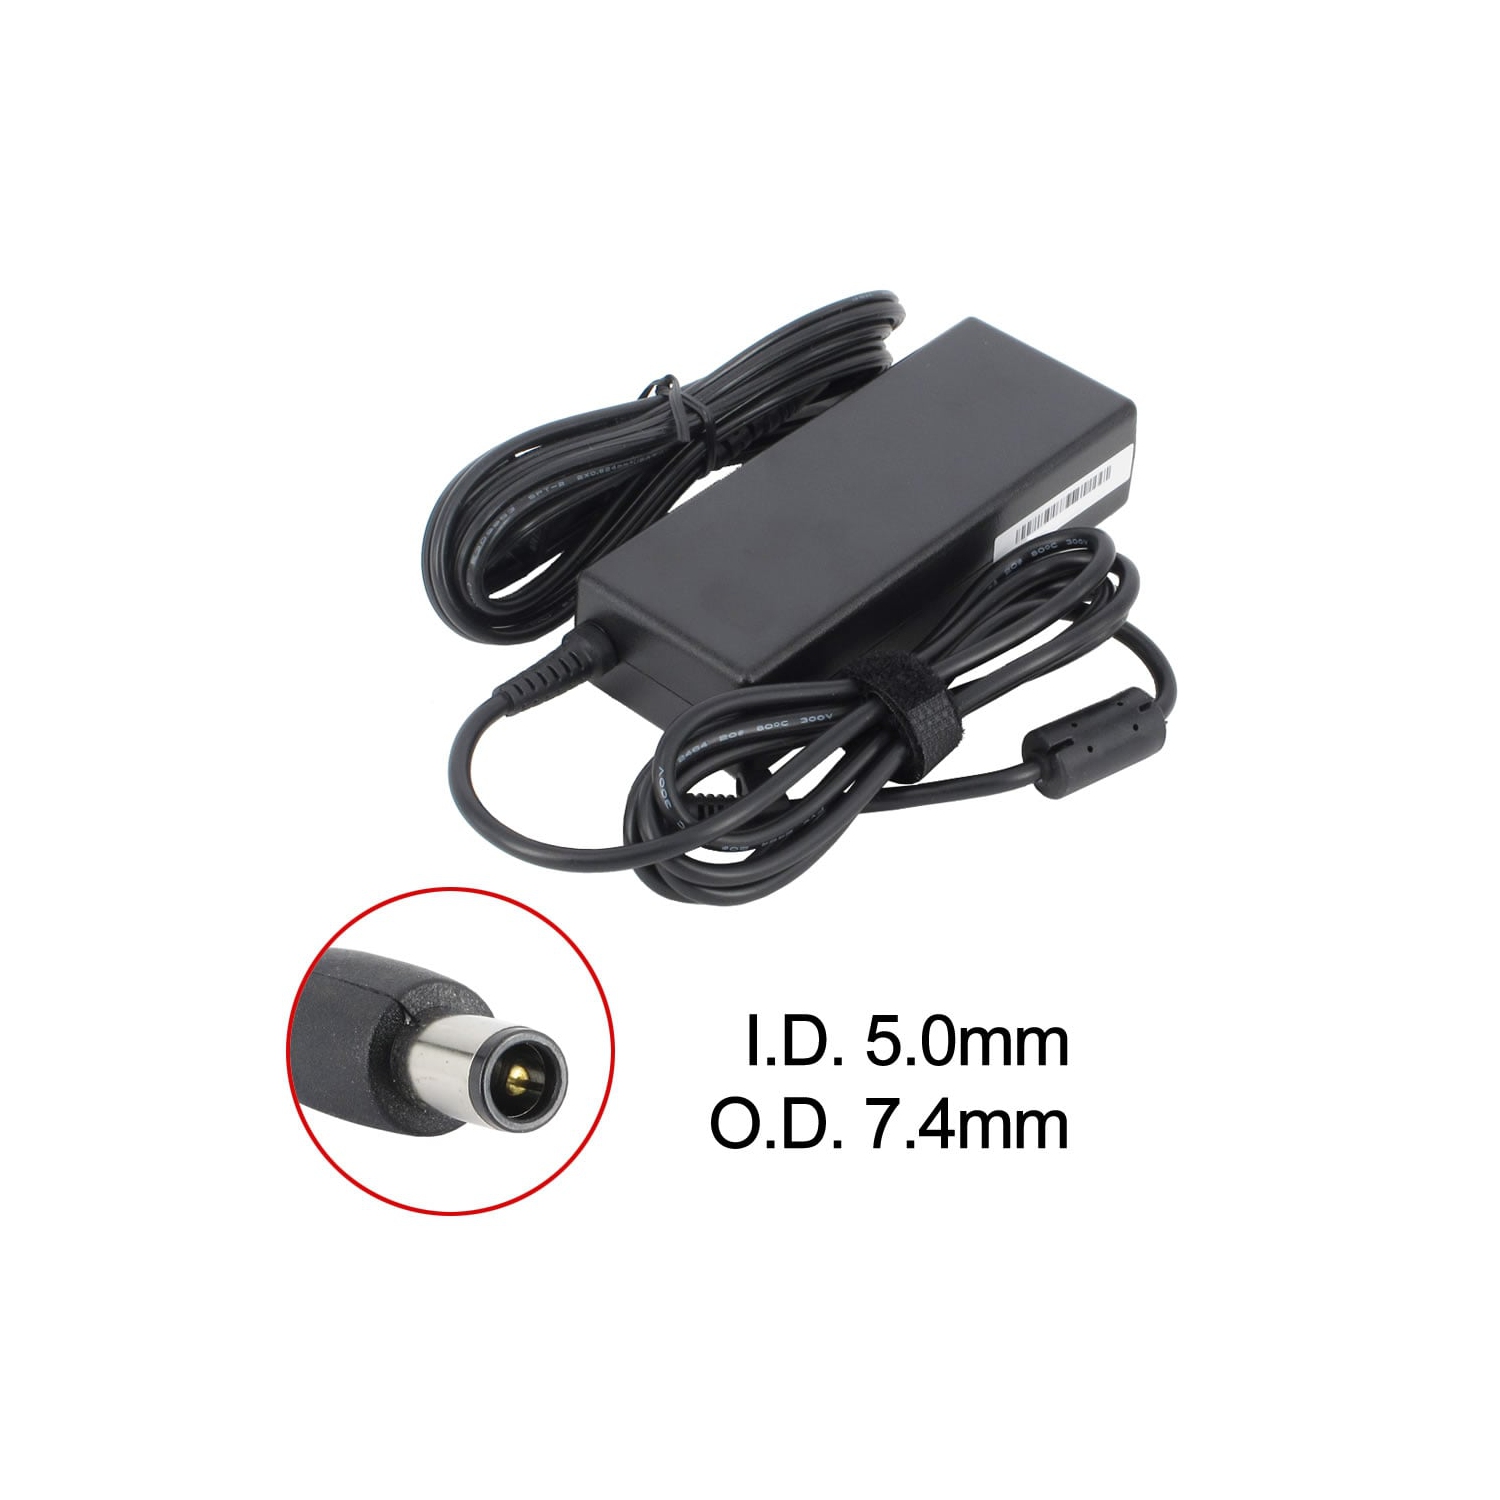 BATTDEPOT New Laptop AC Adapter for HP Pavilion g6-2300ee 409992-001 463554-001 609940-001 HP-AP091F13 LF SE PPP009L-E PPP009H